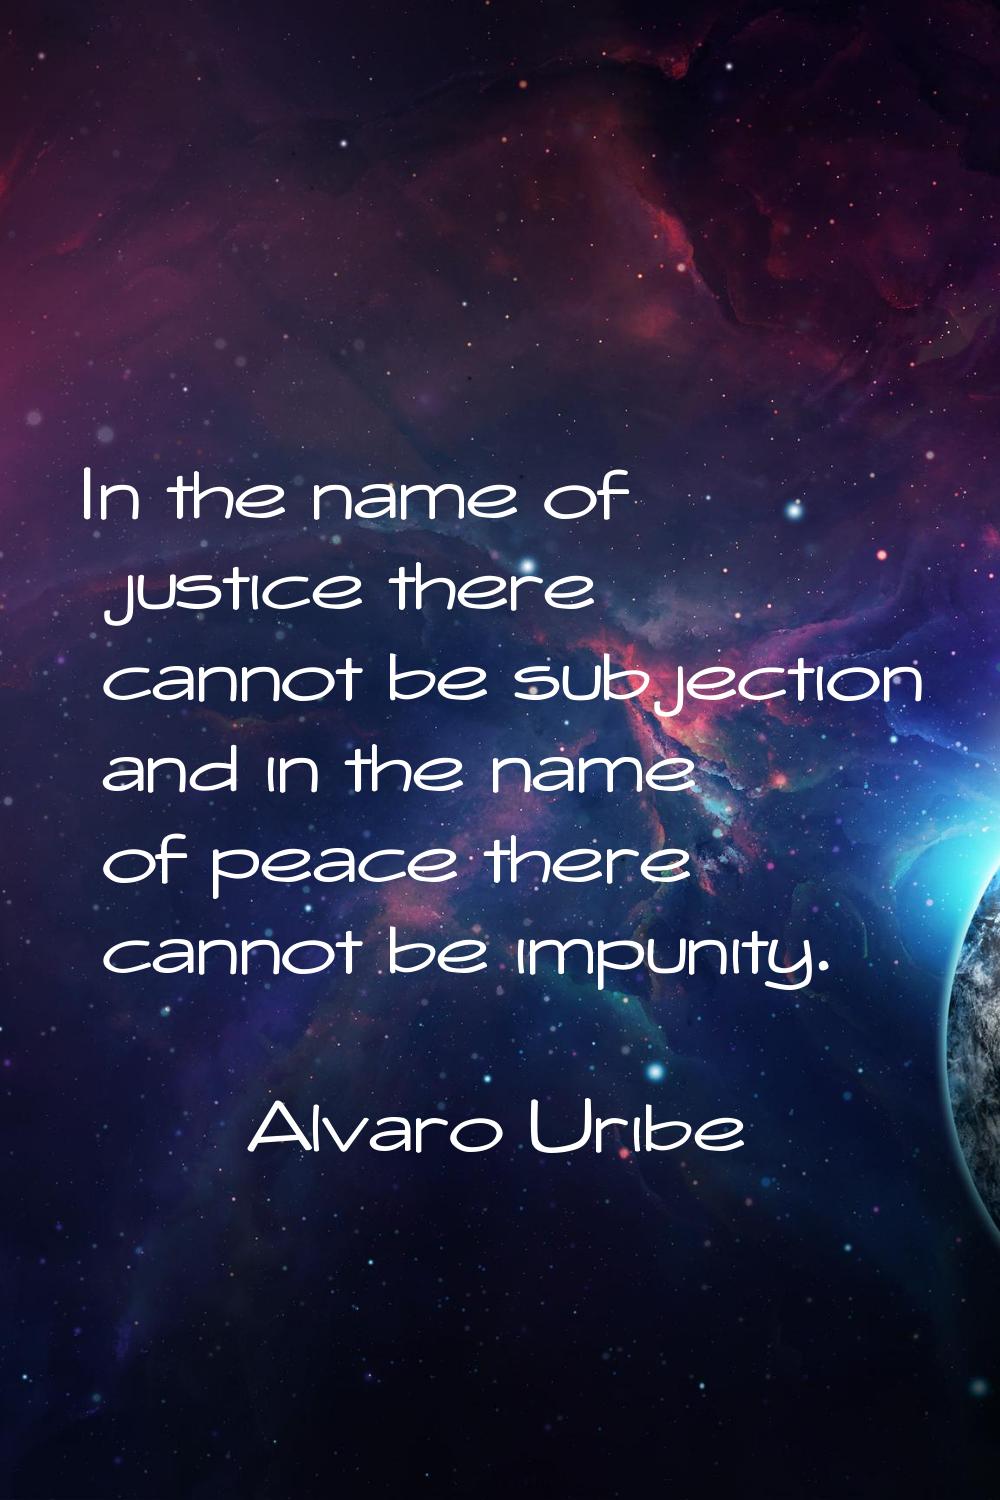 In the name of justice there cannot be subjection and in the name of peace there cannot be impunity